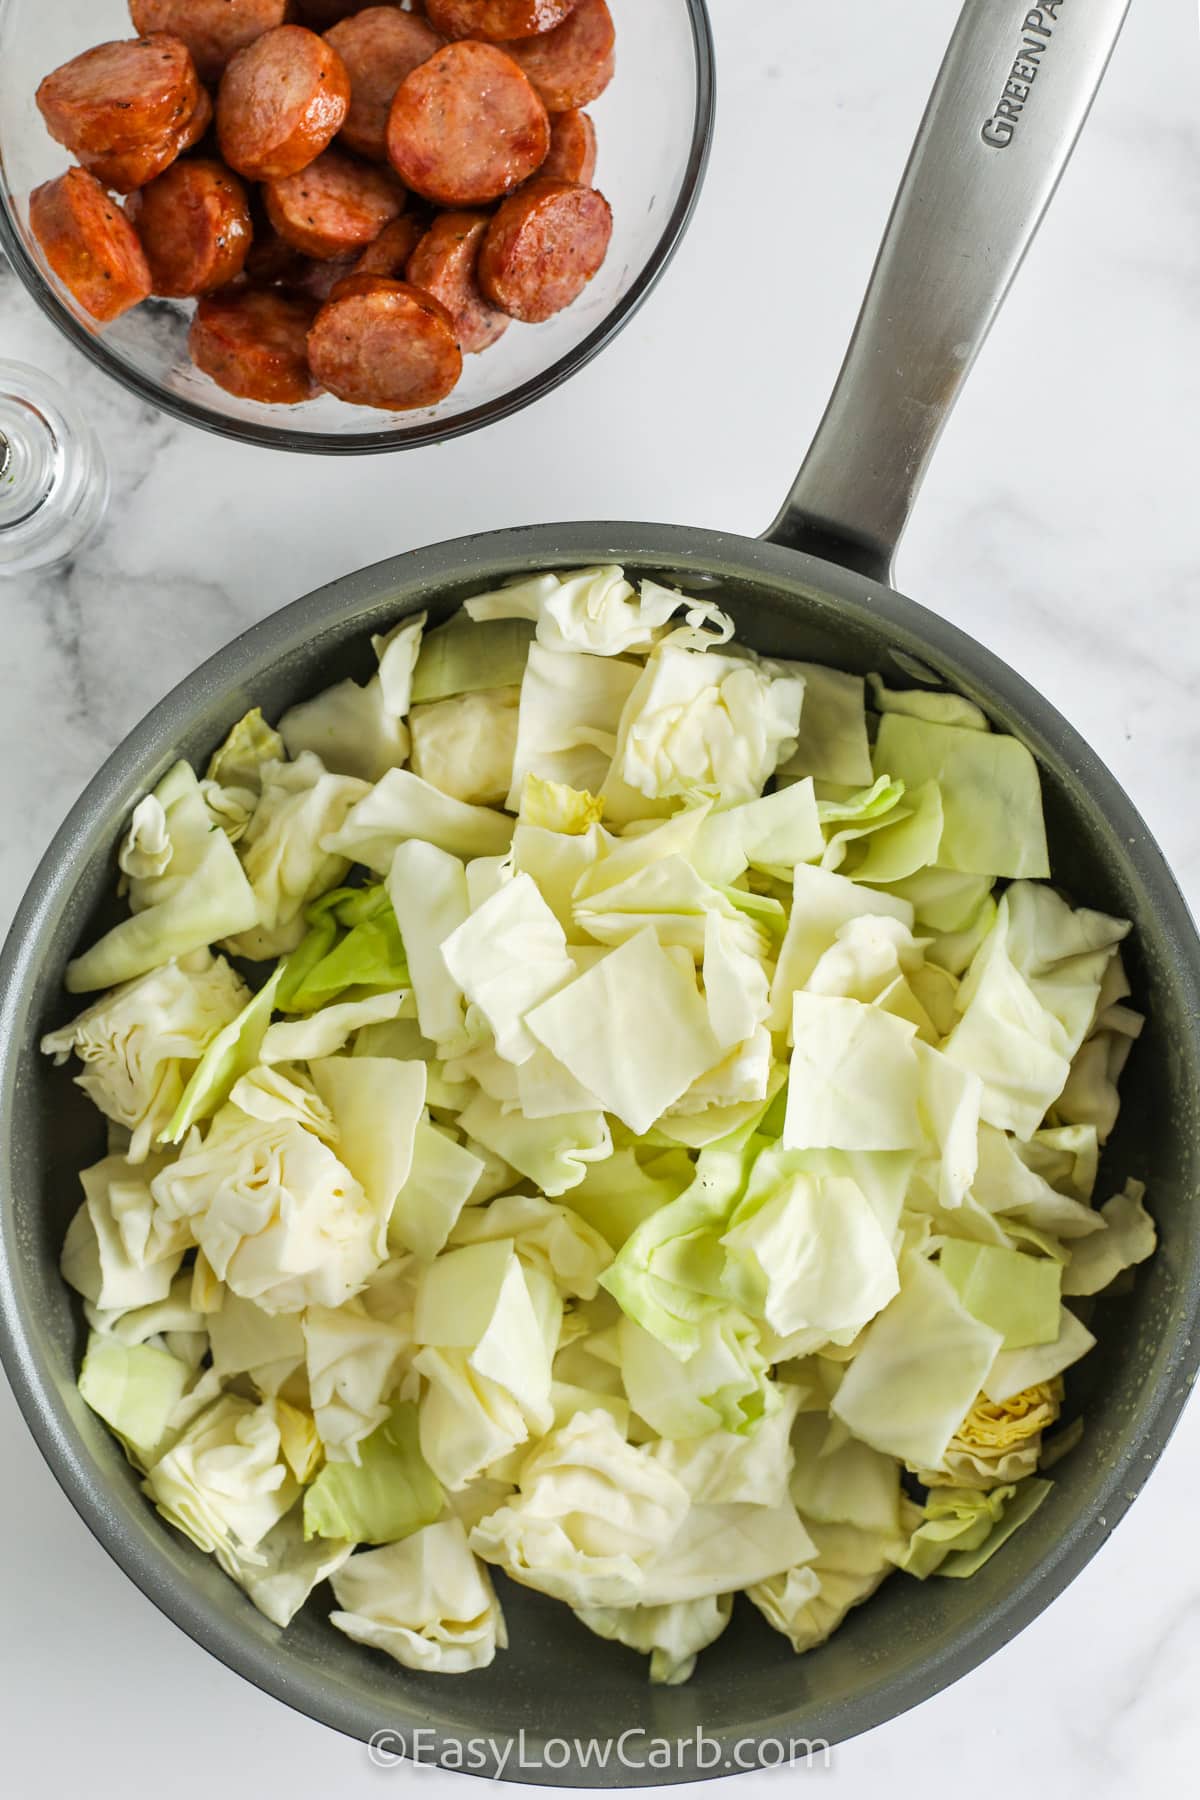 ingredients for Fried Cabbage & Sausage in a skillet and a bowl